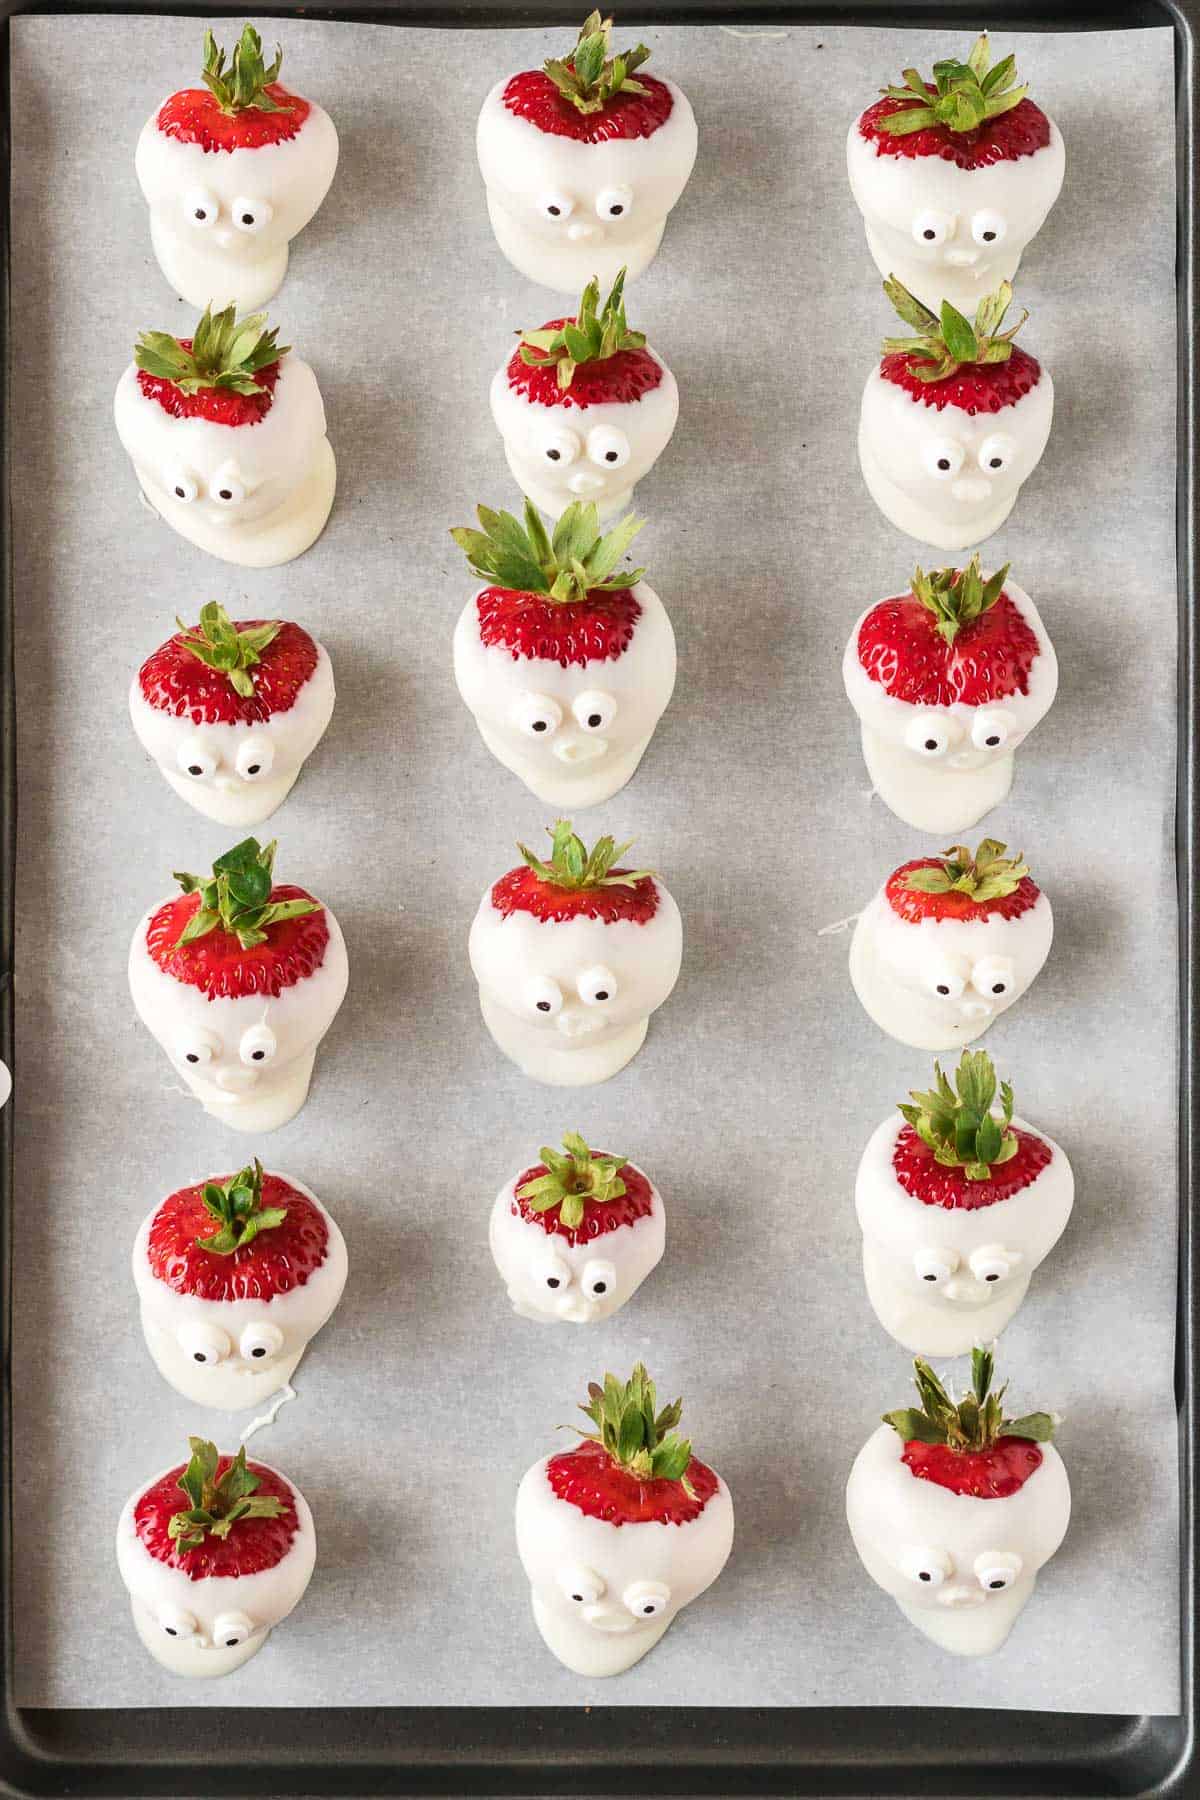 strawberry ghosts with candy eye balls on a baking sheet